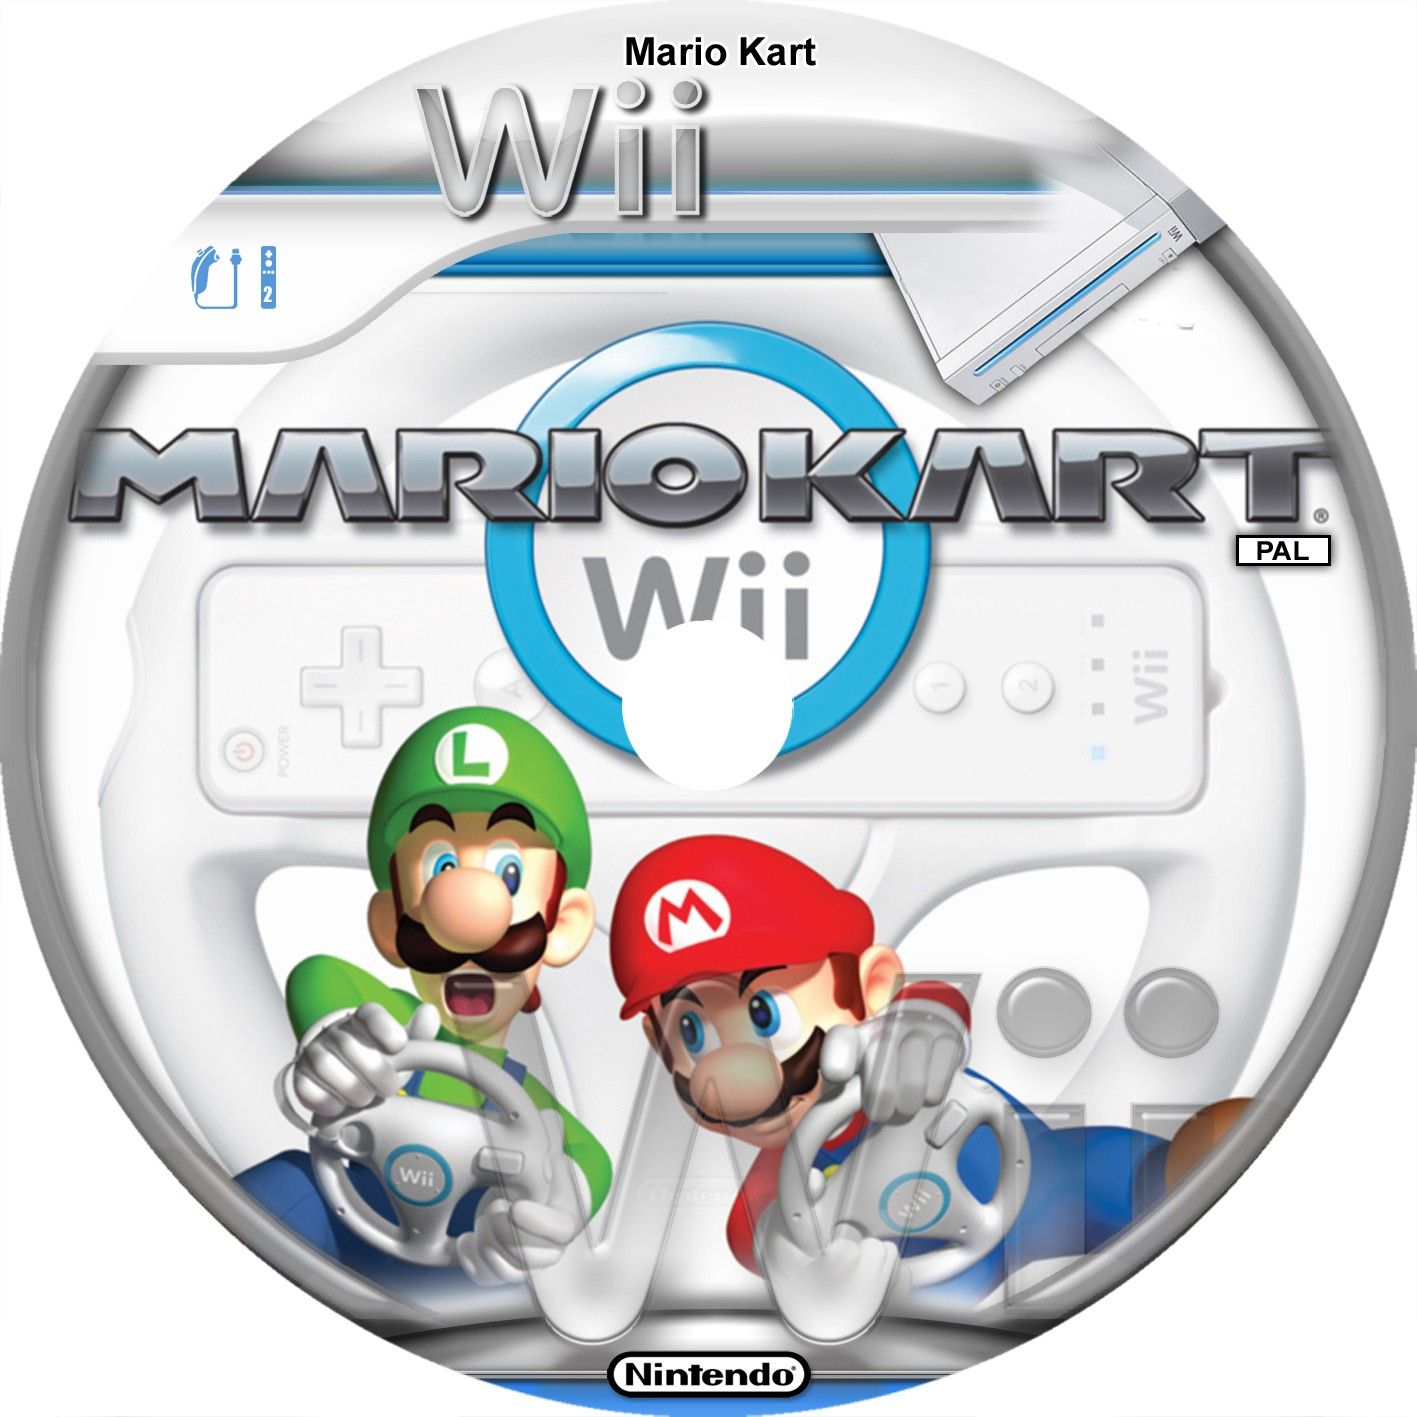 Mario kart wii download android